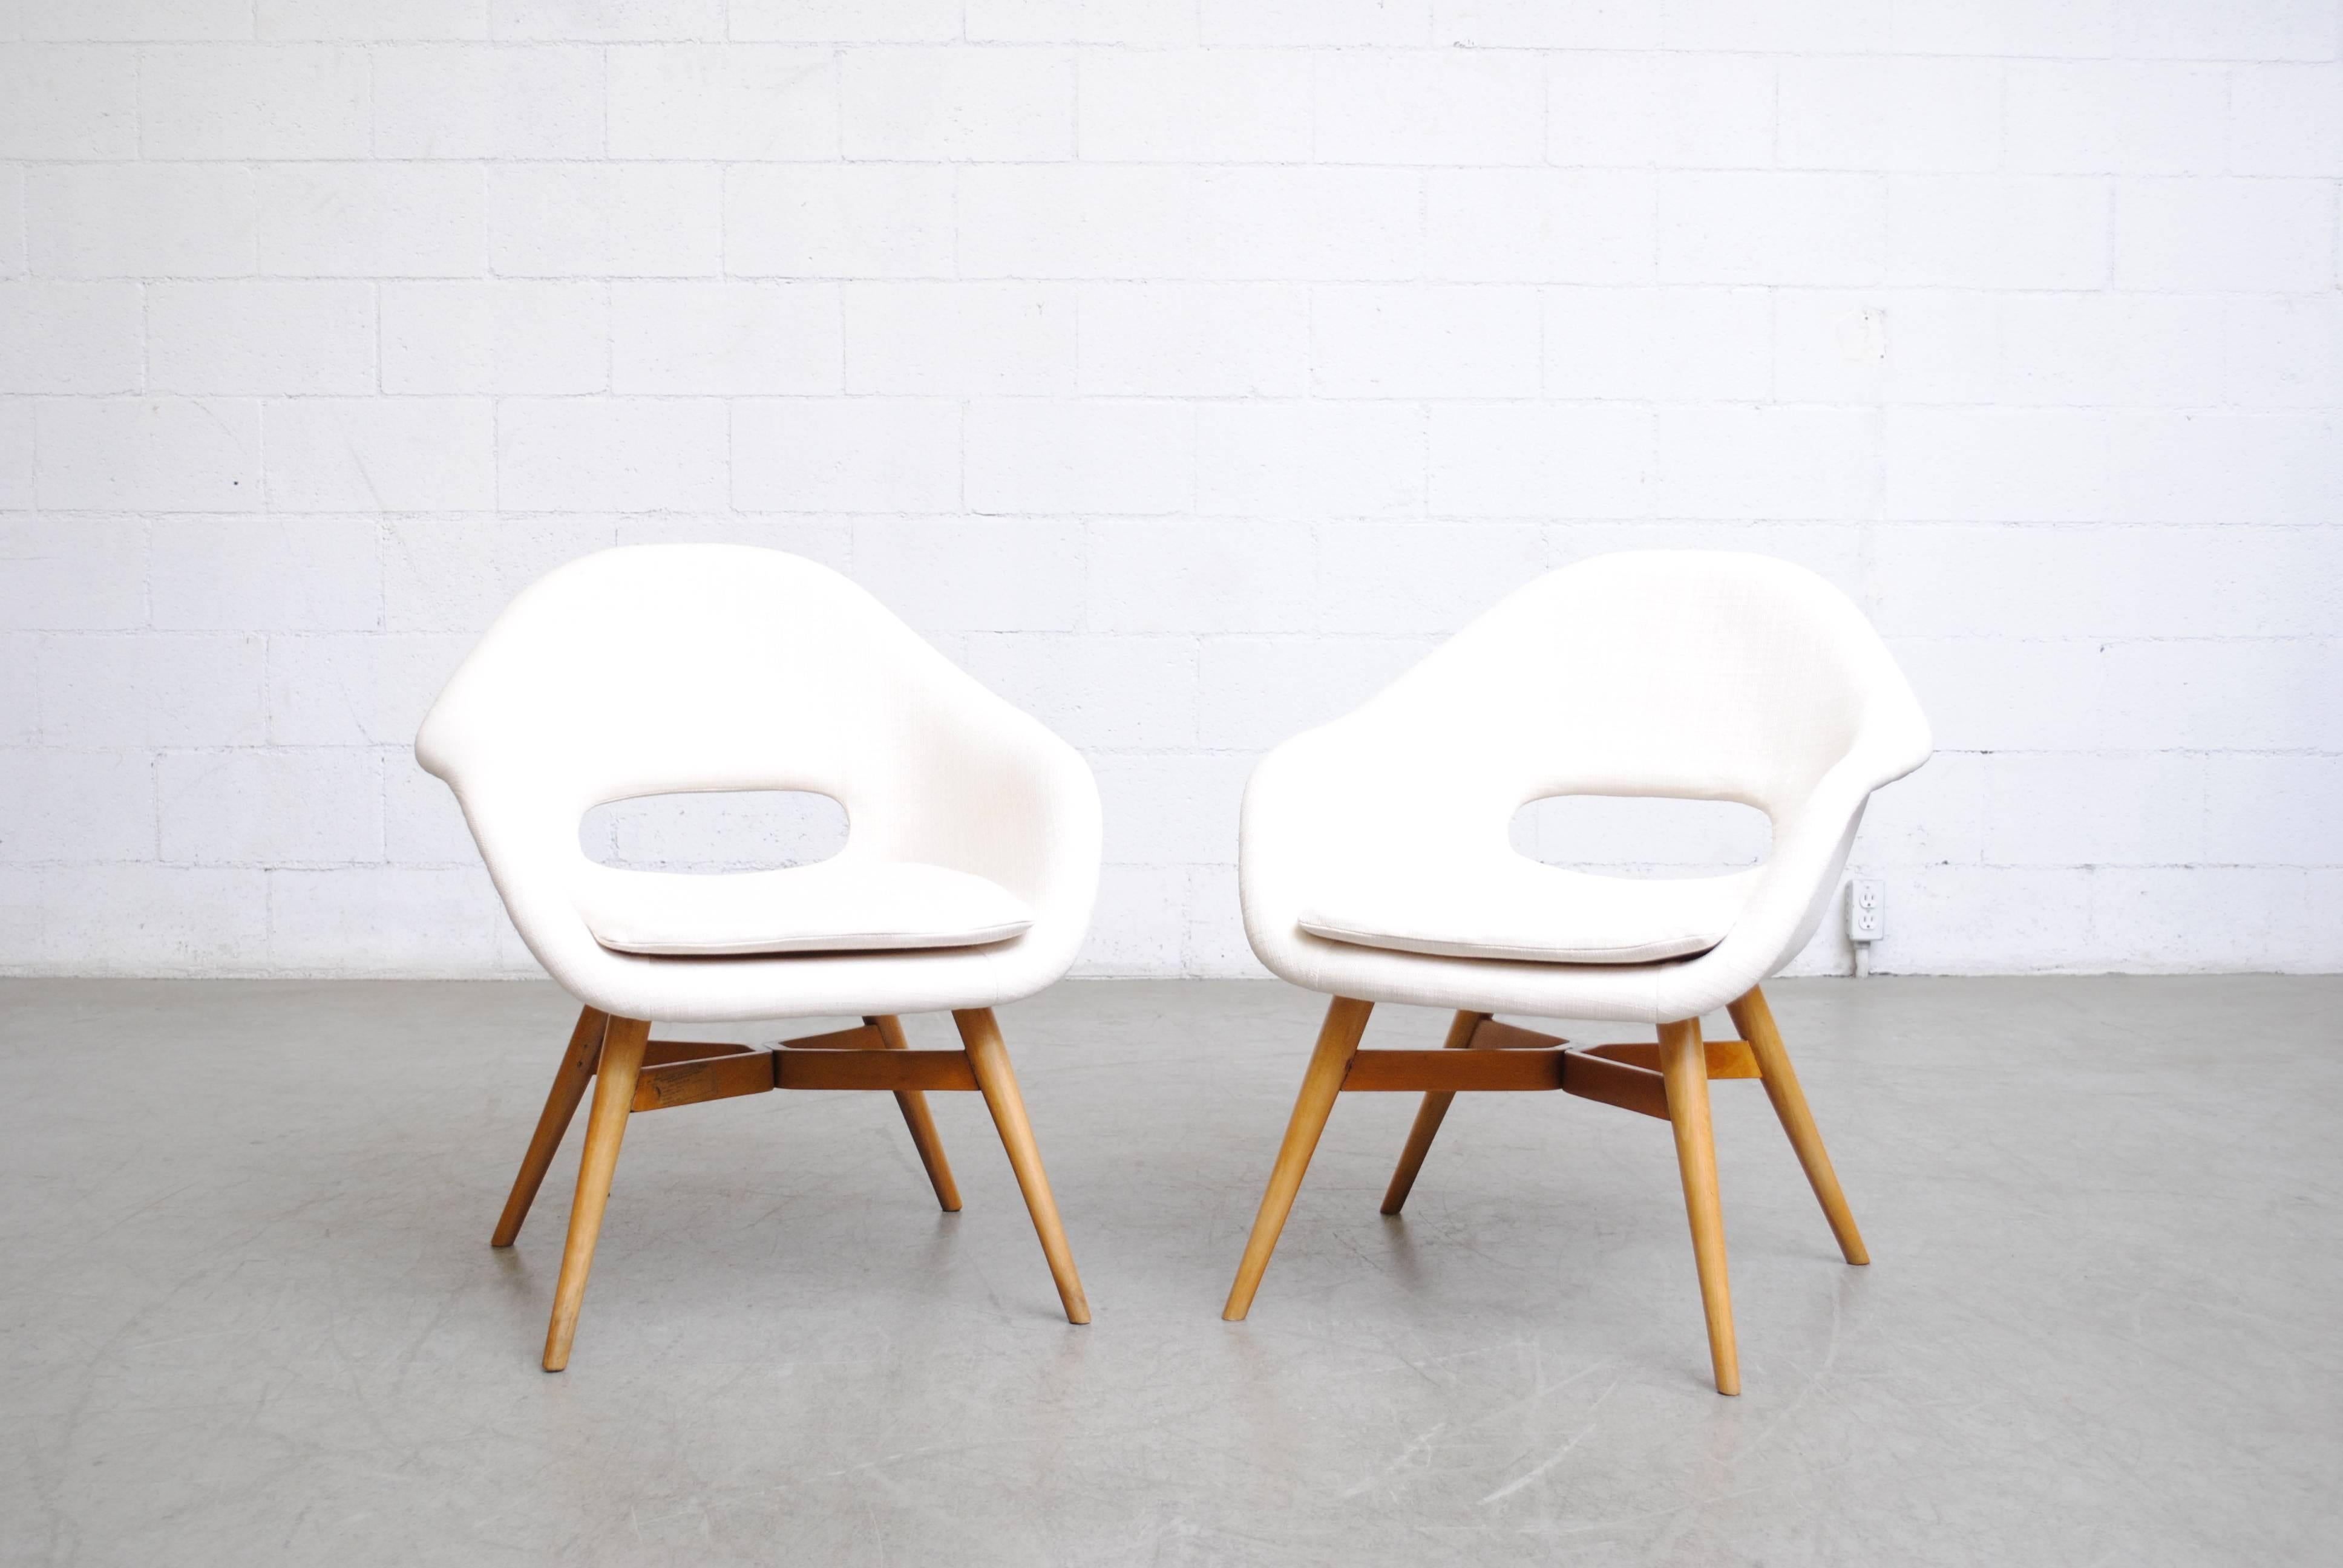 Newly upholstered modern bucket chairs with Saarinen style cut-outs by Miroslav Navratil in snow white upholstery with original birch frame in good original condition, other similar styles available, 100+ in original upholstery. Set price.